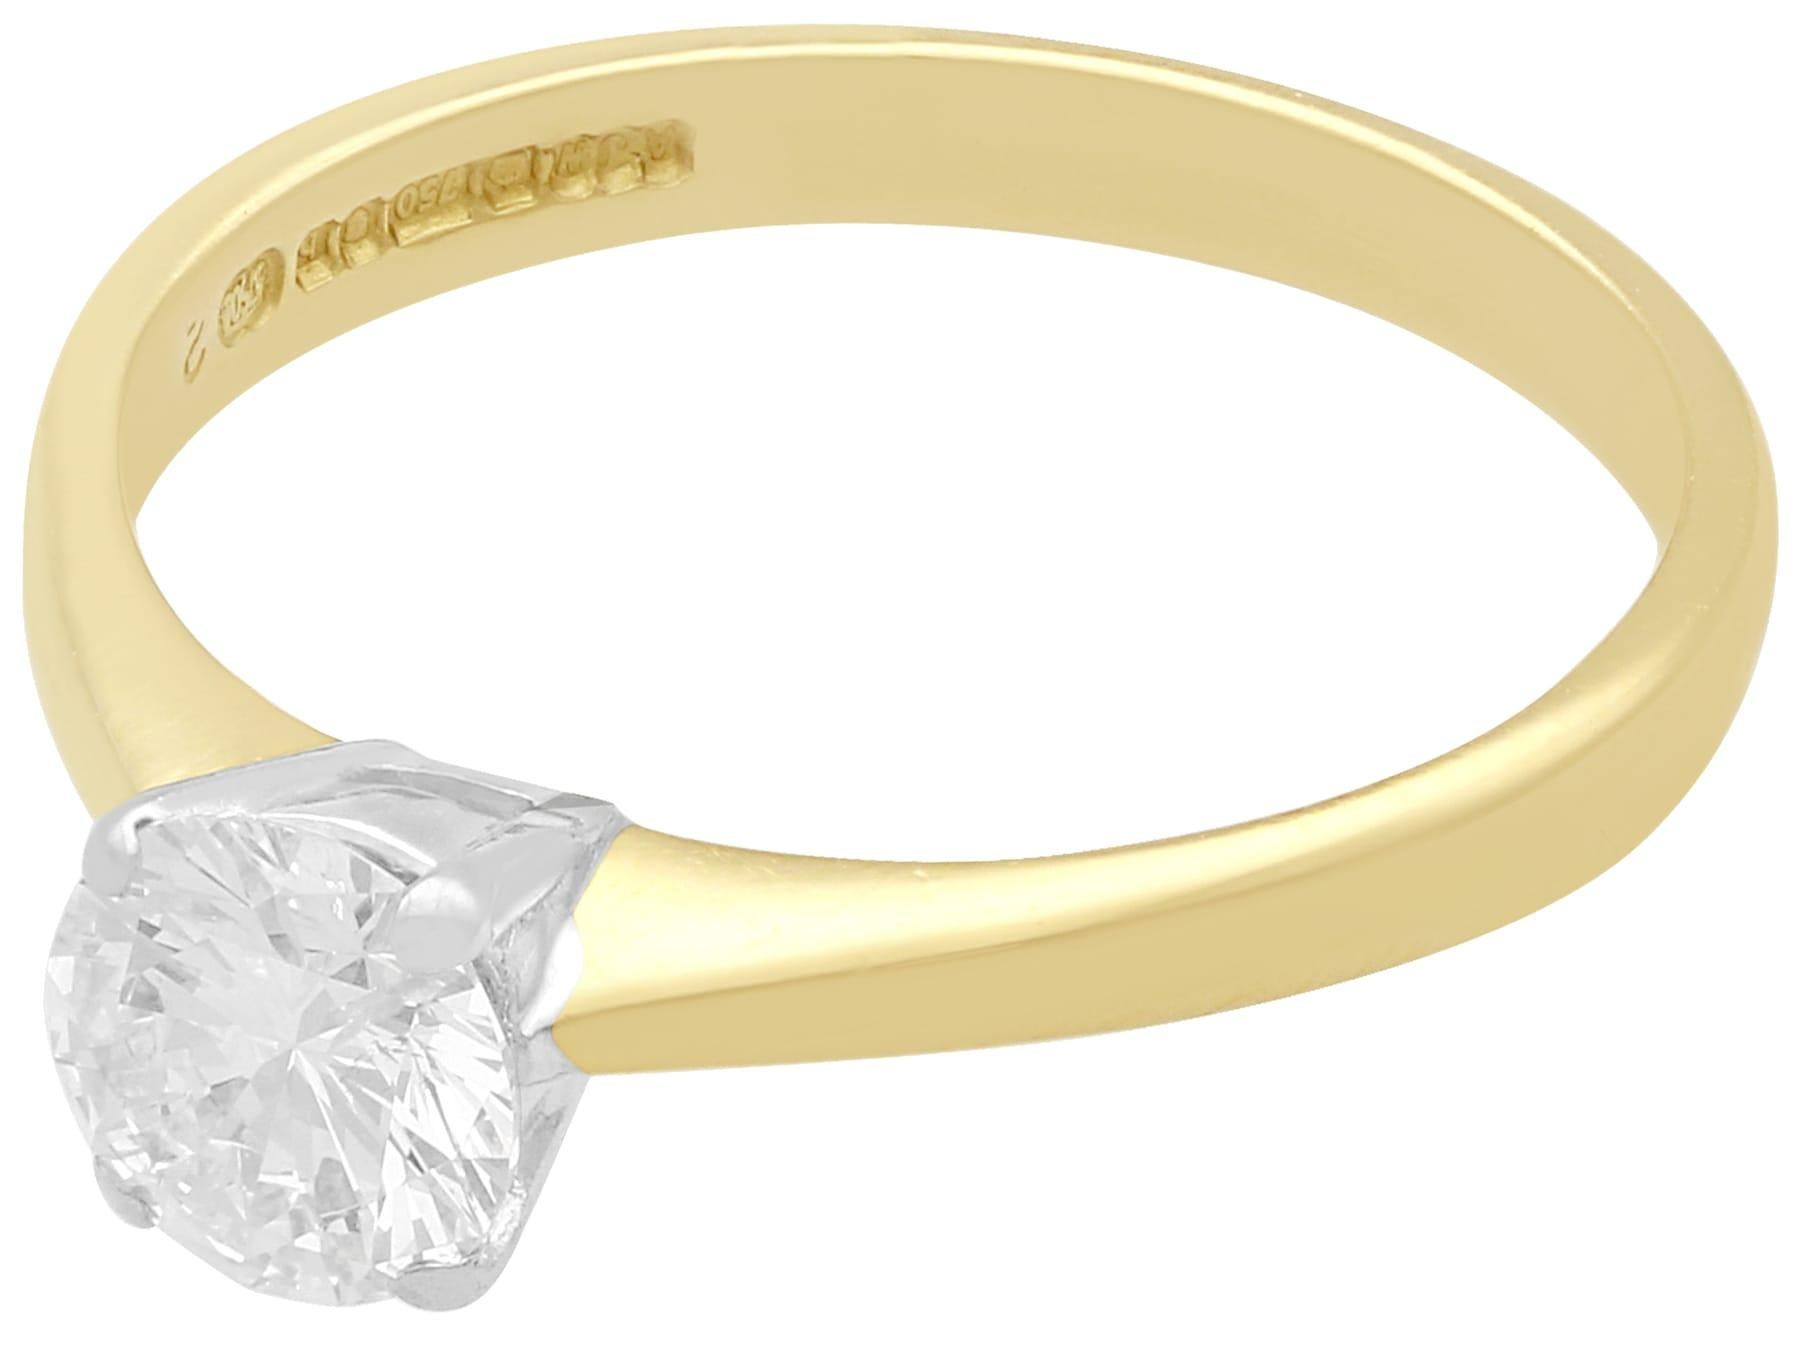 An impressive contemporary 0.61 carat diamond and 18 karat yellow gold, 18 karat white gold set solitaire ring; part of our diverse diamond jewelry collections.

This fine and impressive diamond solitaire ring has been crafted in 18k yellow gold